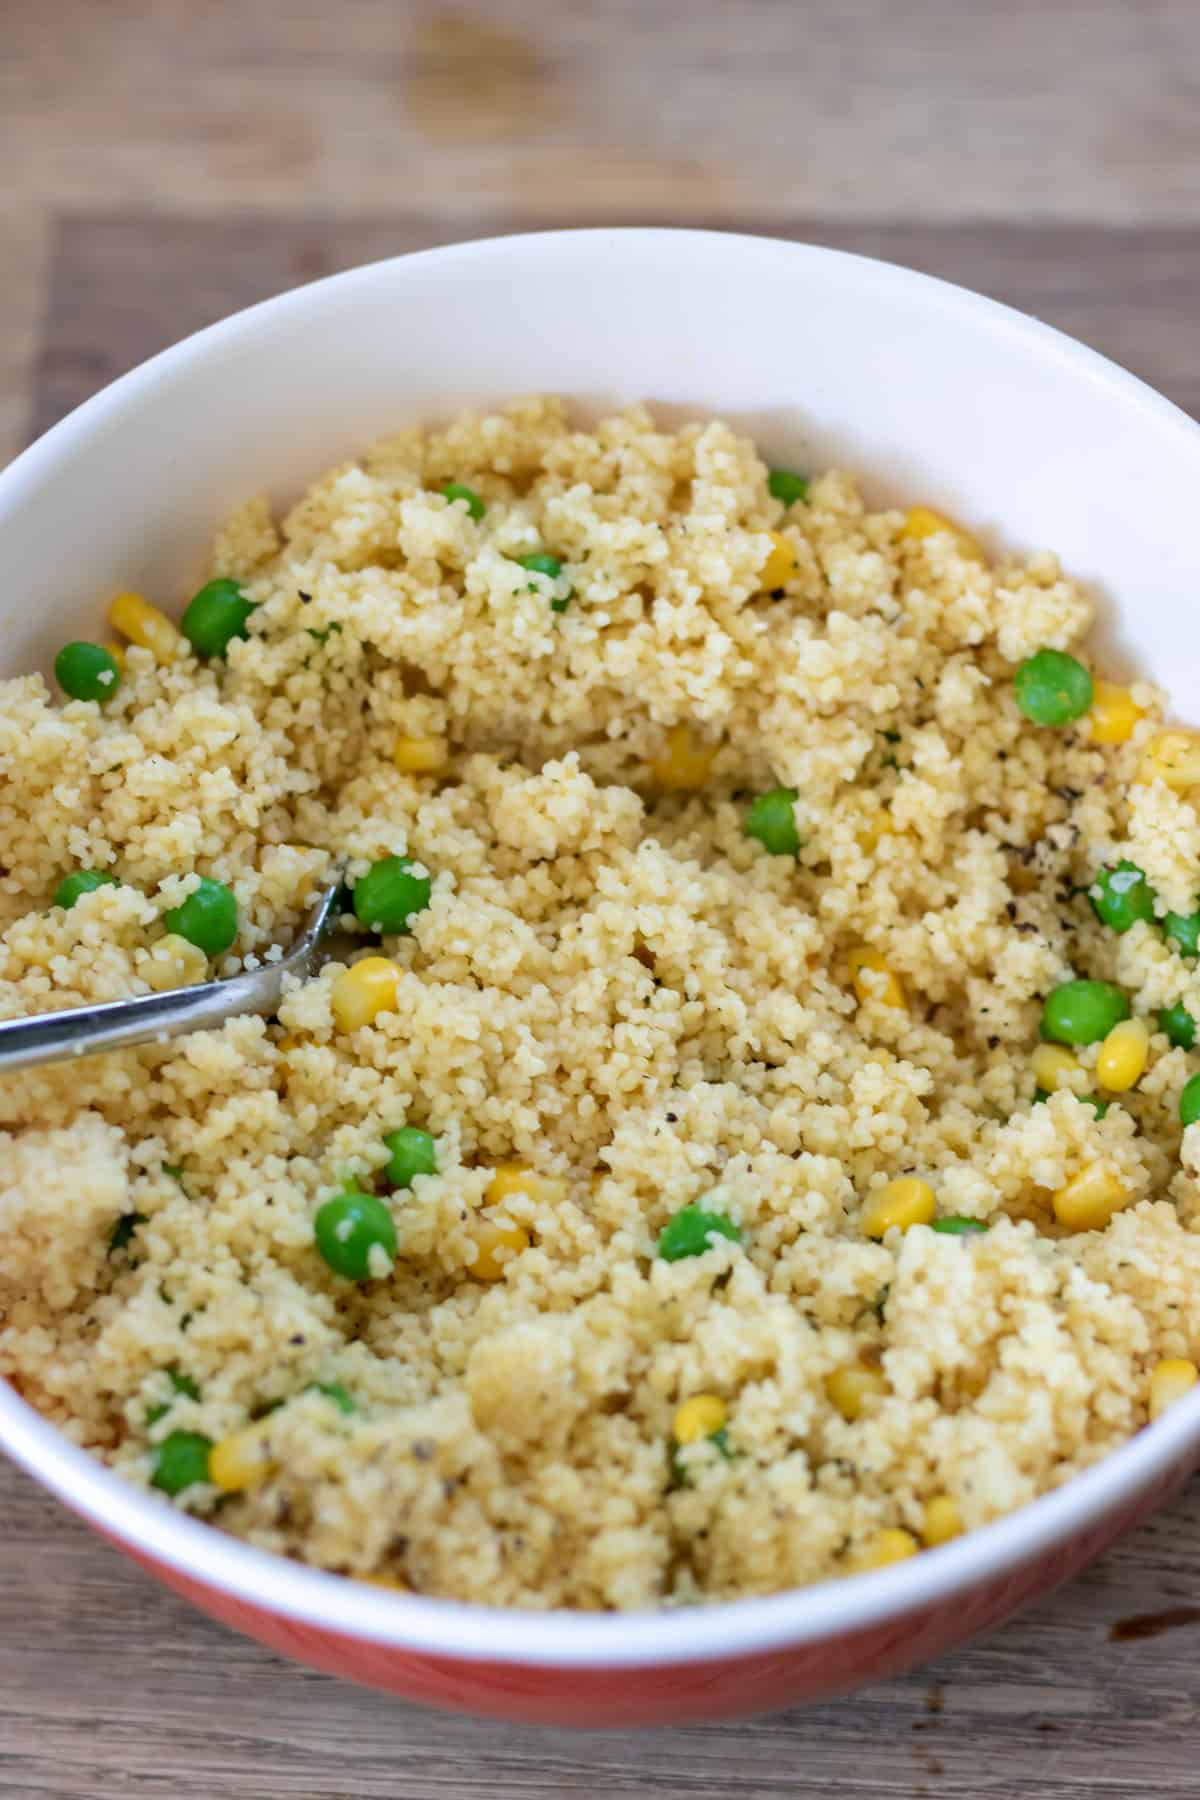 Bowl of cooked couscous with peas and corn.